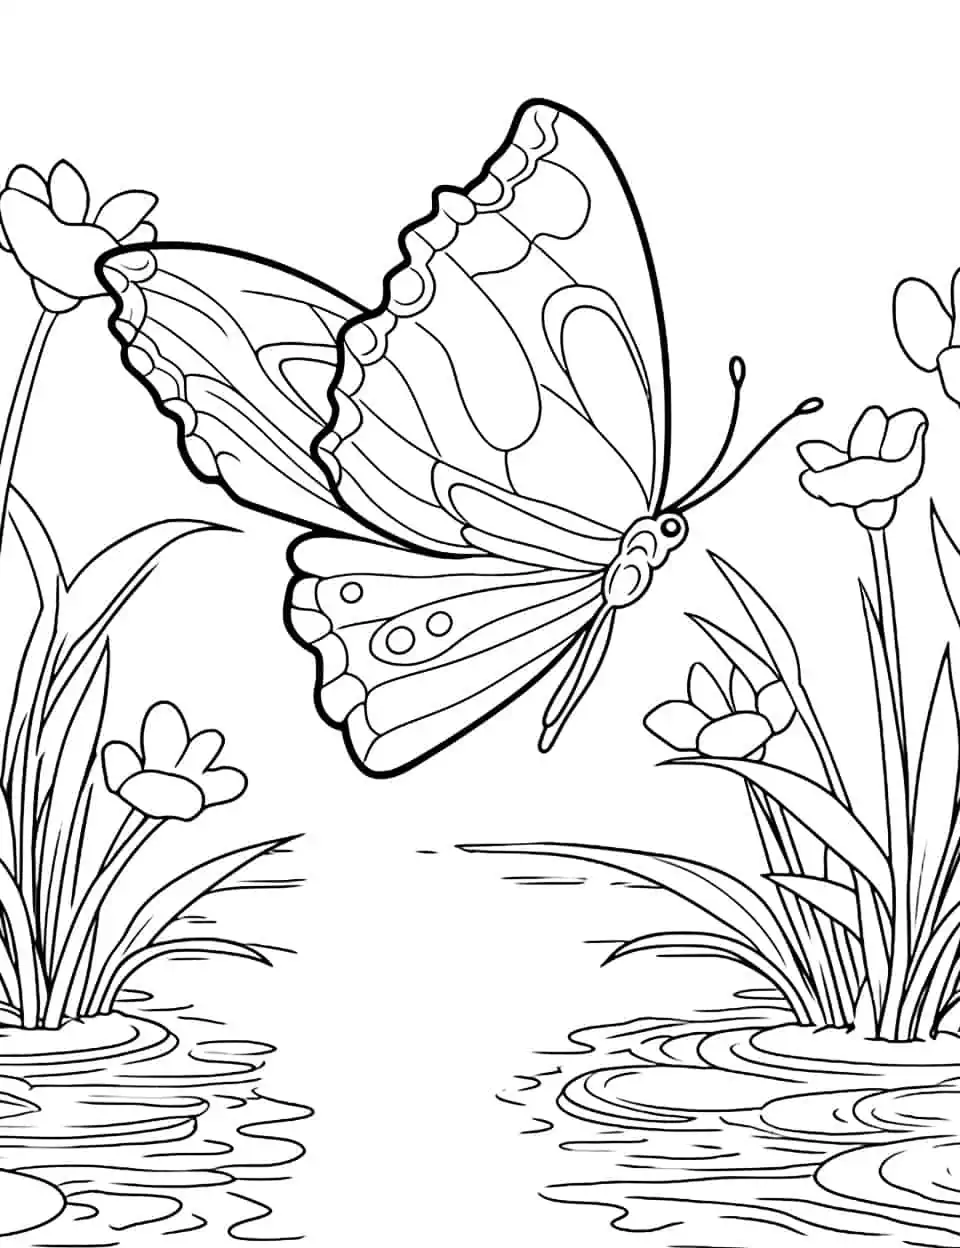 Tranquil Waters Butterfly Coloring Page - A coloring page featuring a butterfly near a calm pond surrounded by water lilies.